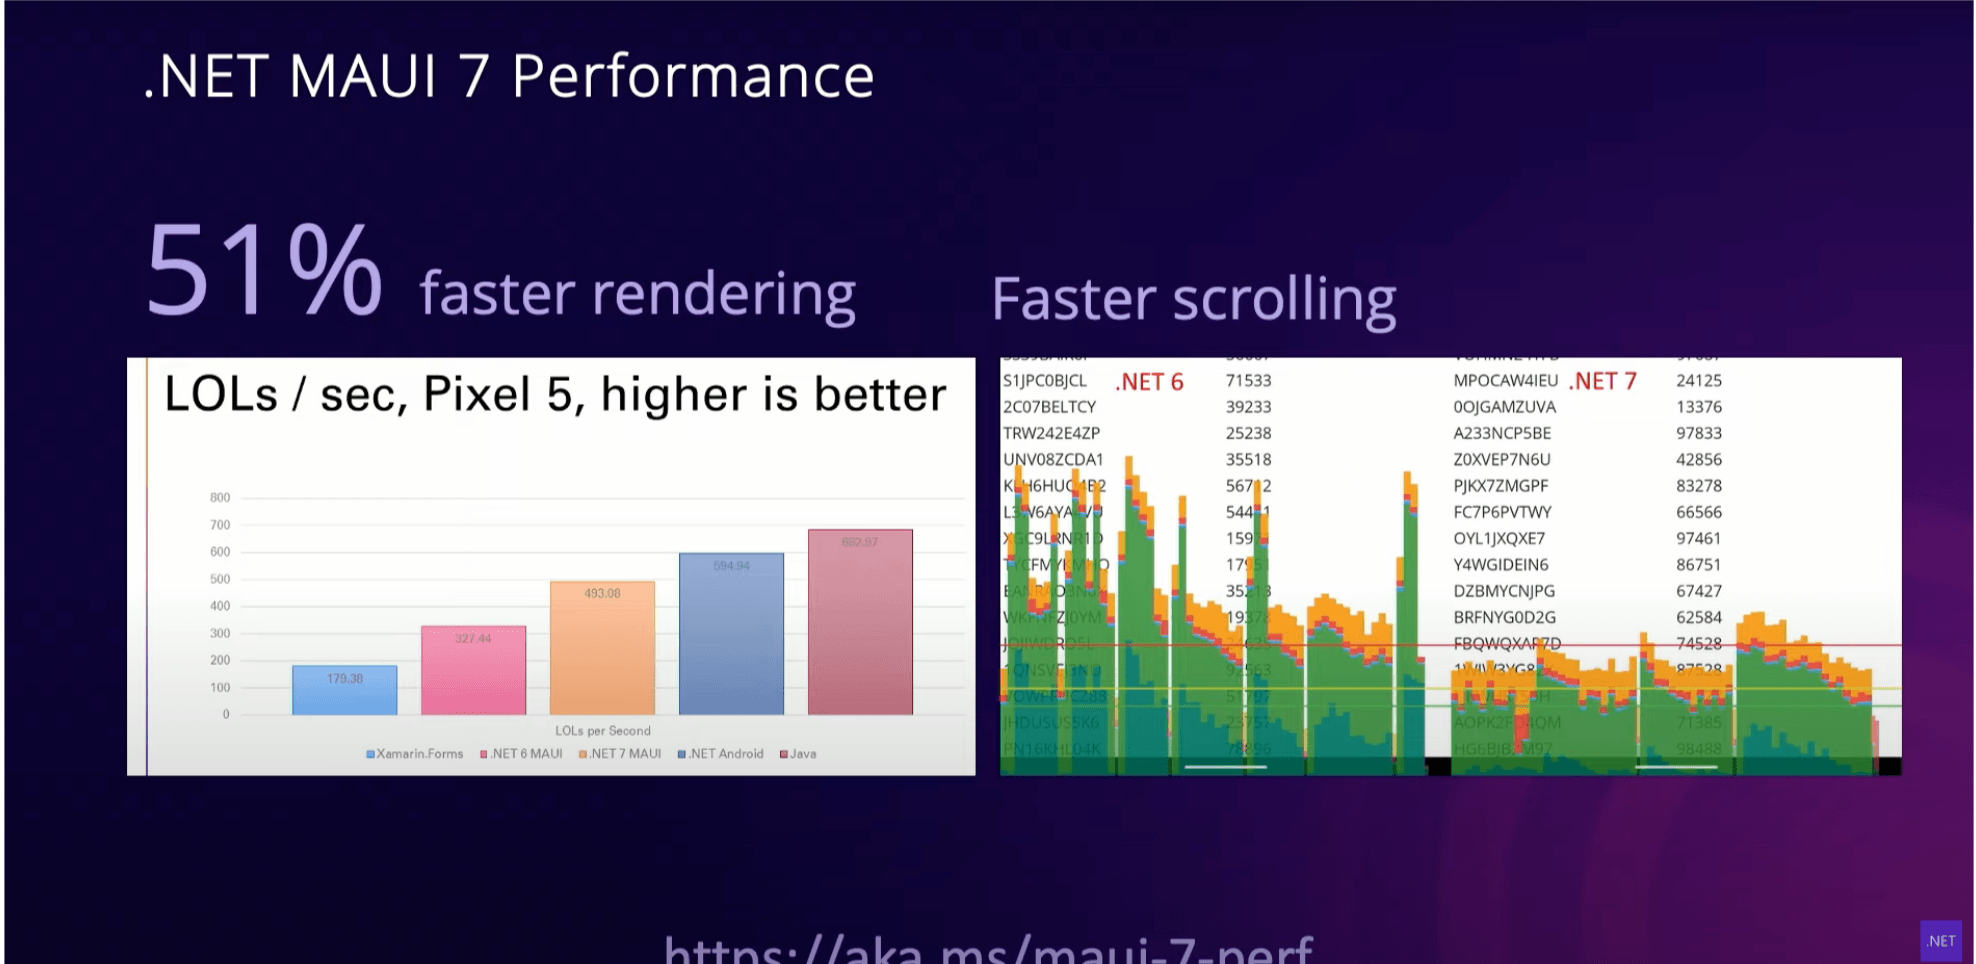 .NET MAUI 7 Performance - 51% faster rendering, faster scrolling